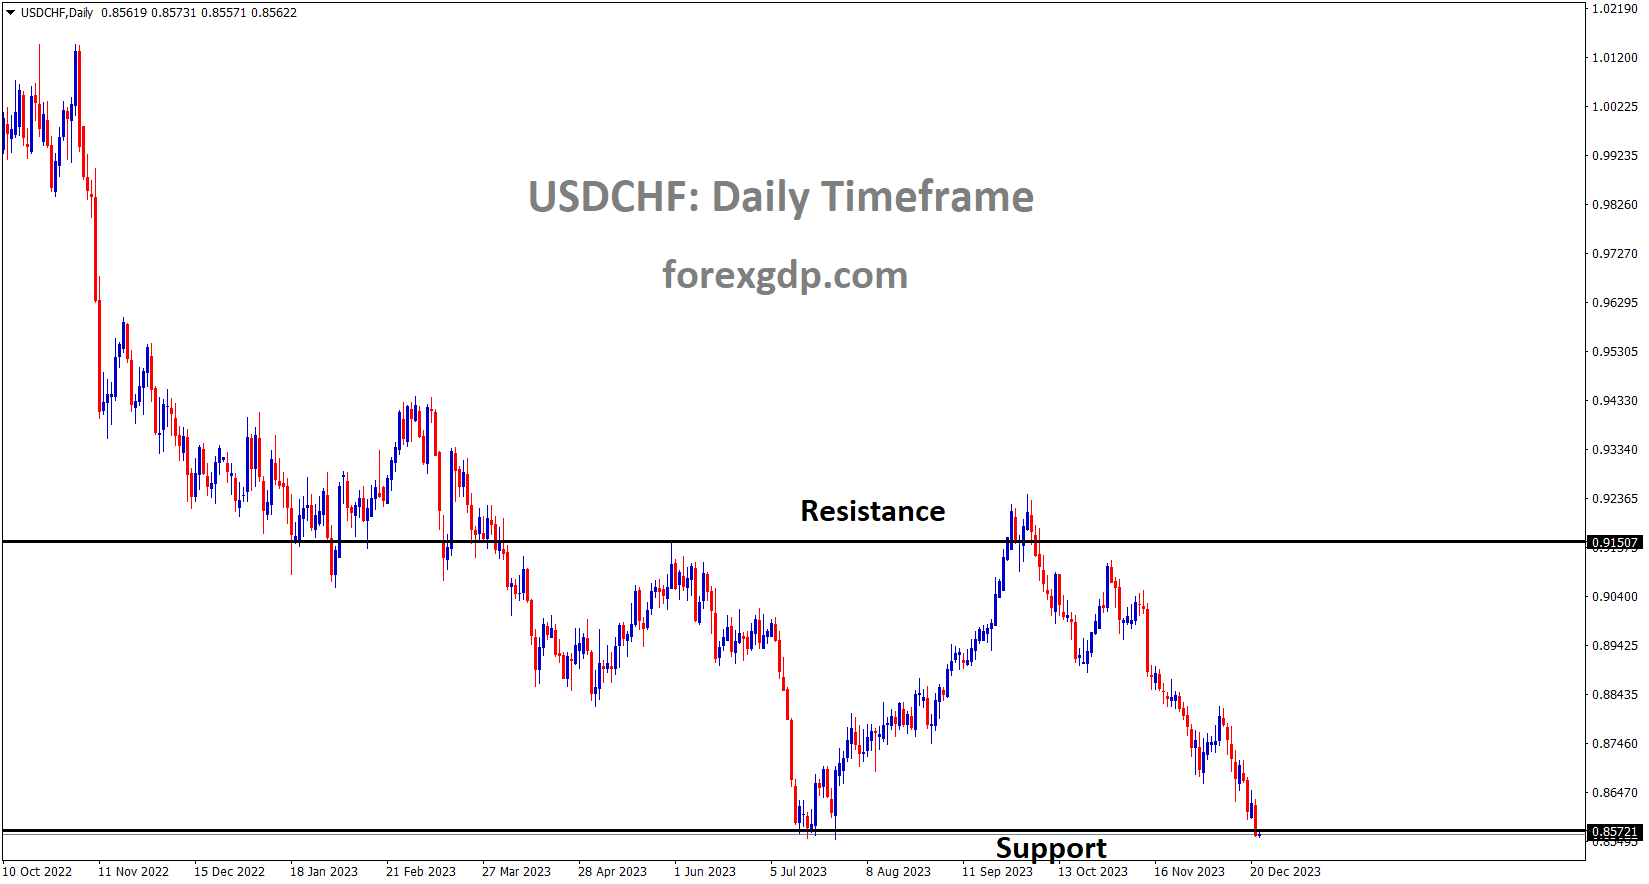 USDCHF is moving in the Box pattern and the market has reached the support area of the pattern